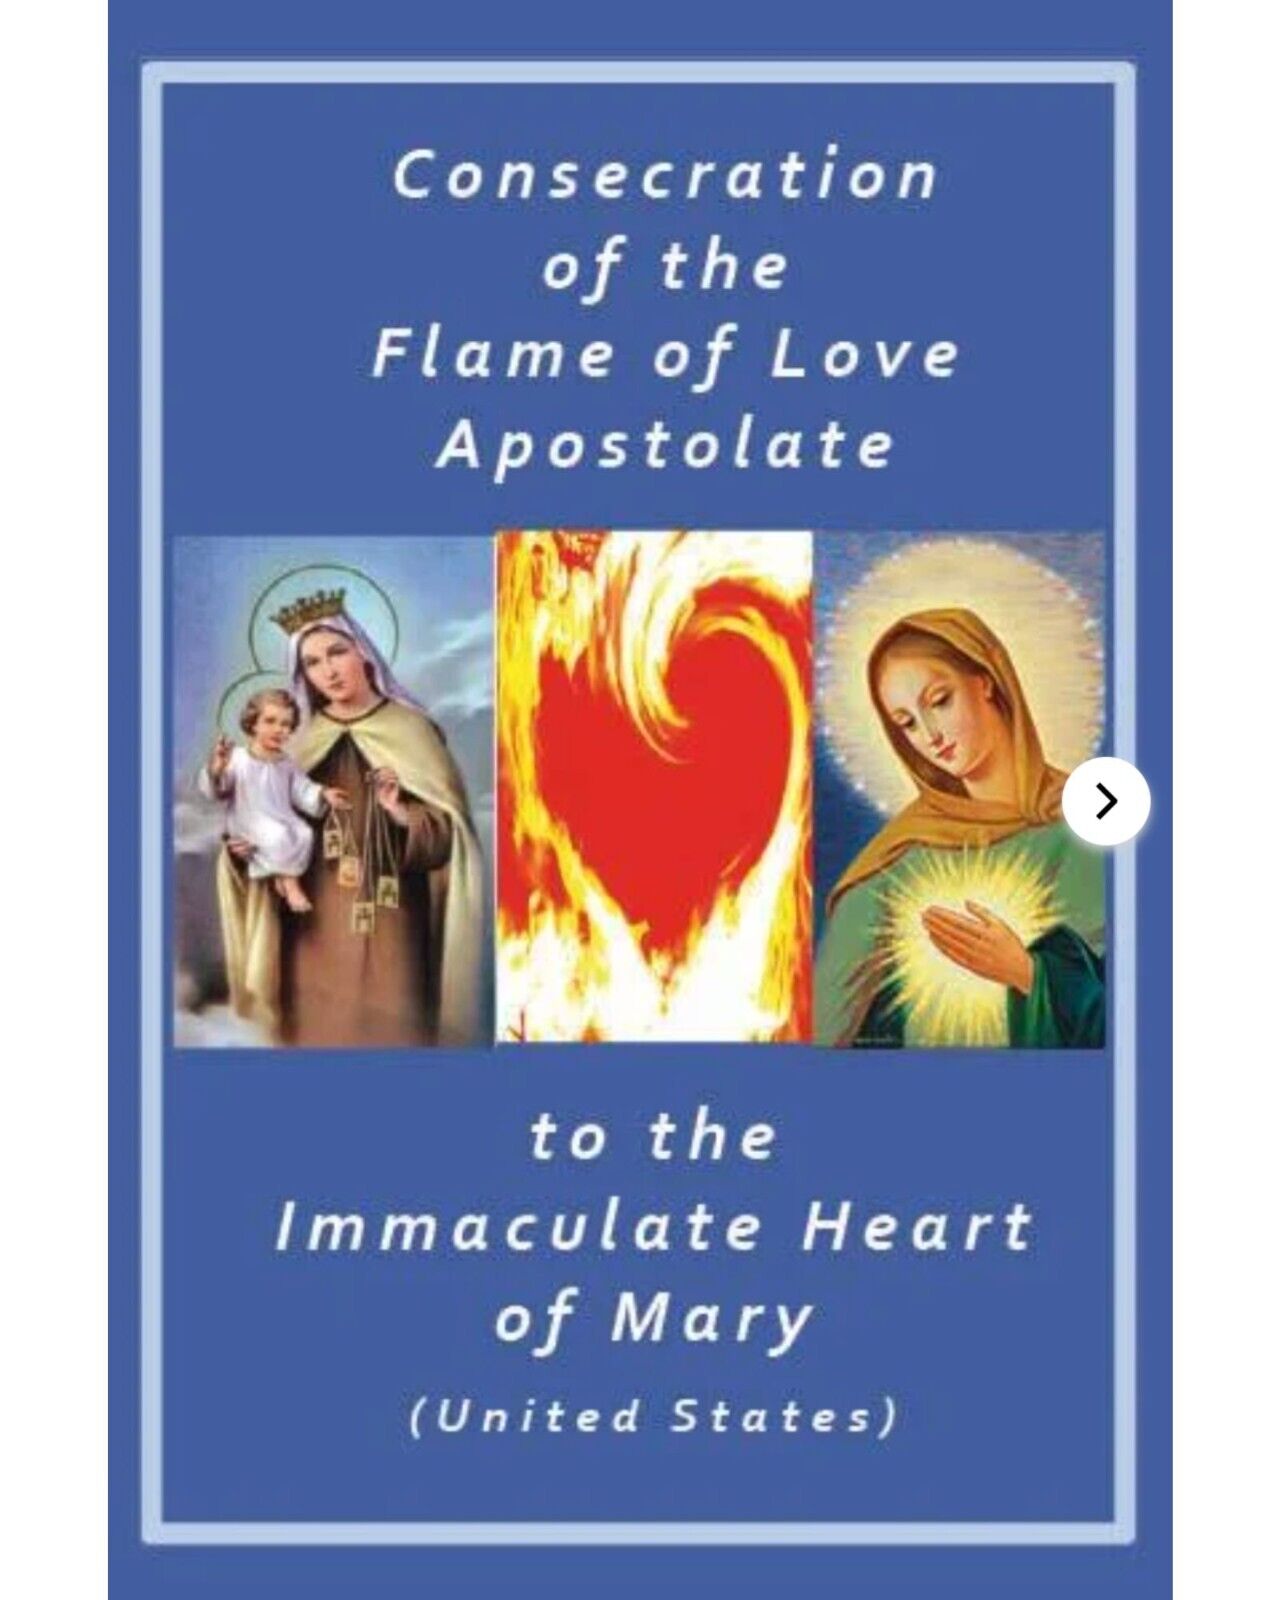 LARGE FLAME OF LOVE CONSECRATION PRAYER CARD